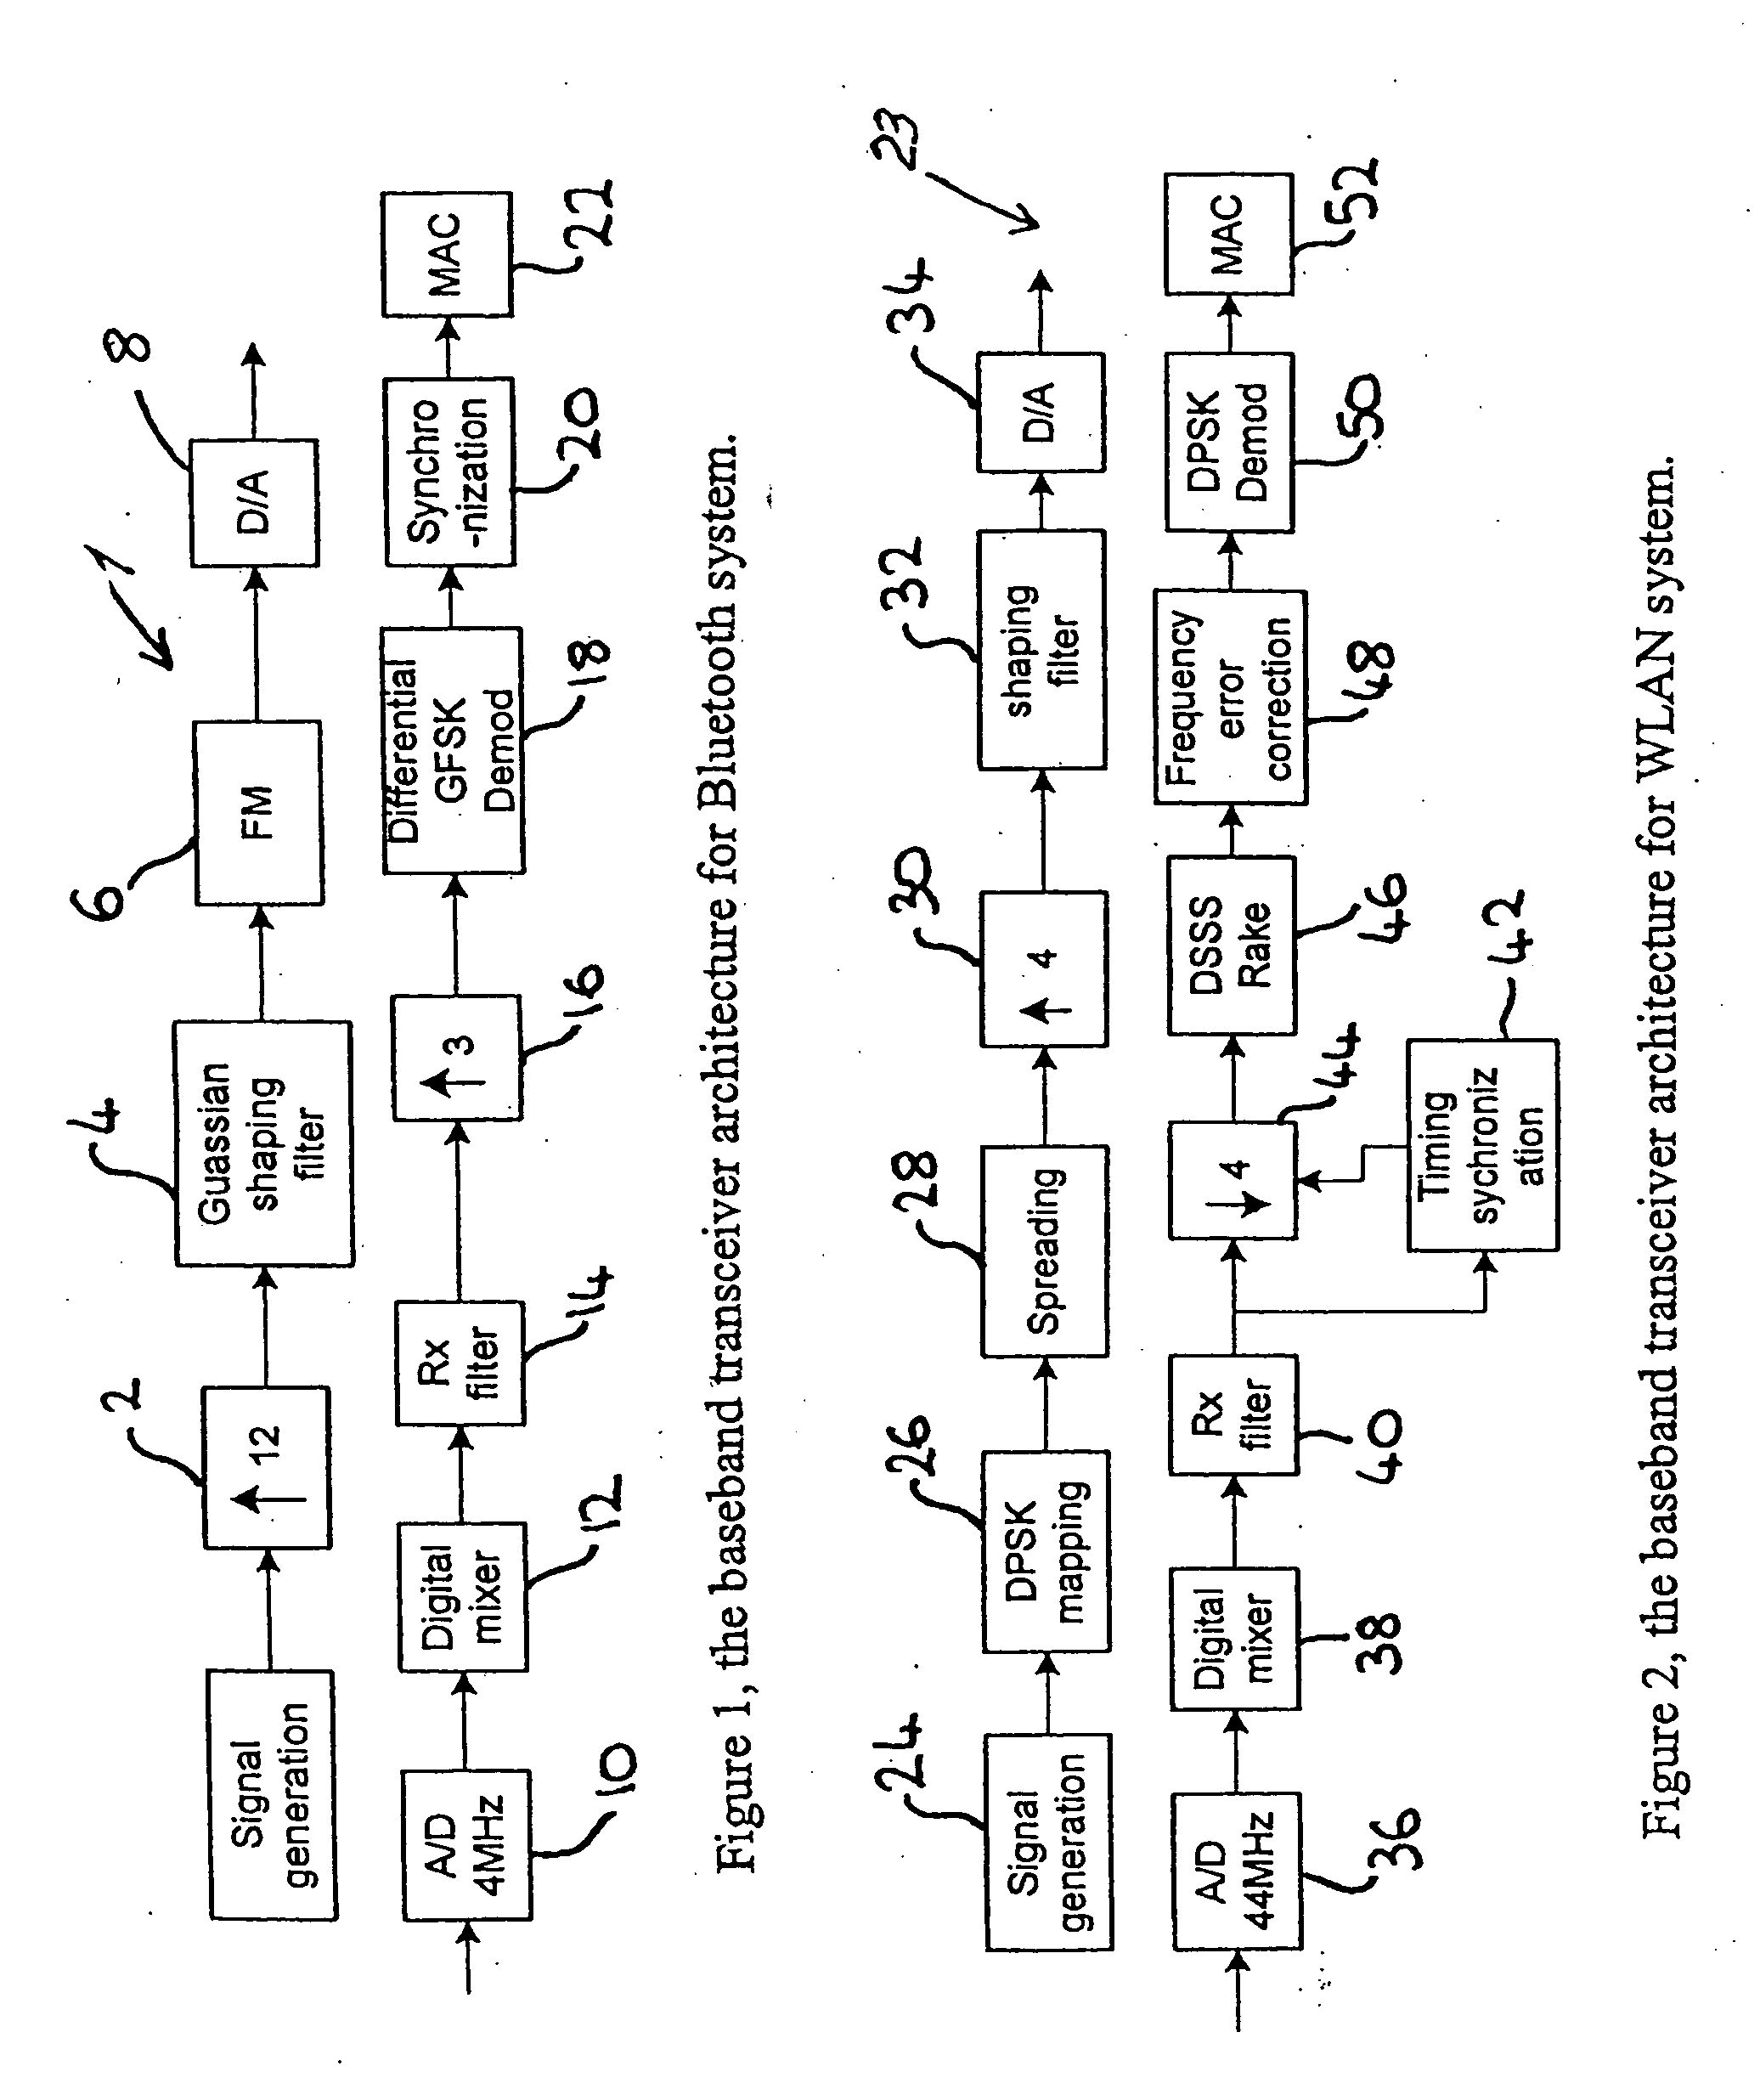 Methods for processing a received signal in a software defined radio (SDR) system, a transceiver for an SDR system and a receiver for an SDR system